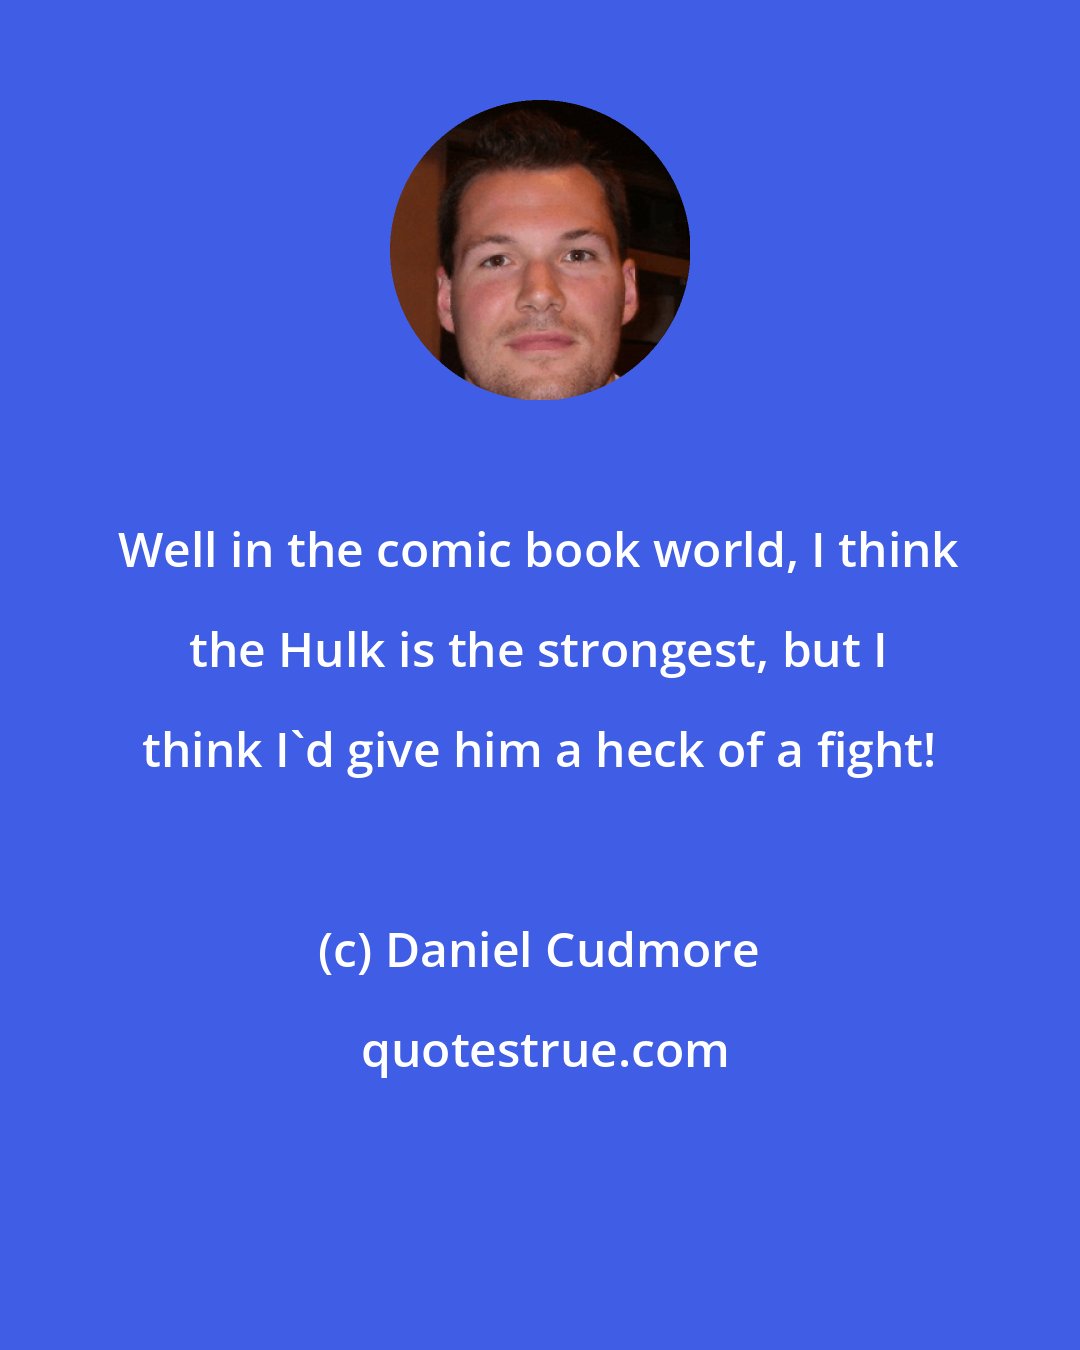 Daniel Cudmore: Well in the comic book world, I think the Hulk is the strongest, but I think I'd give him a heck of a fight!